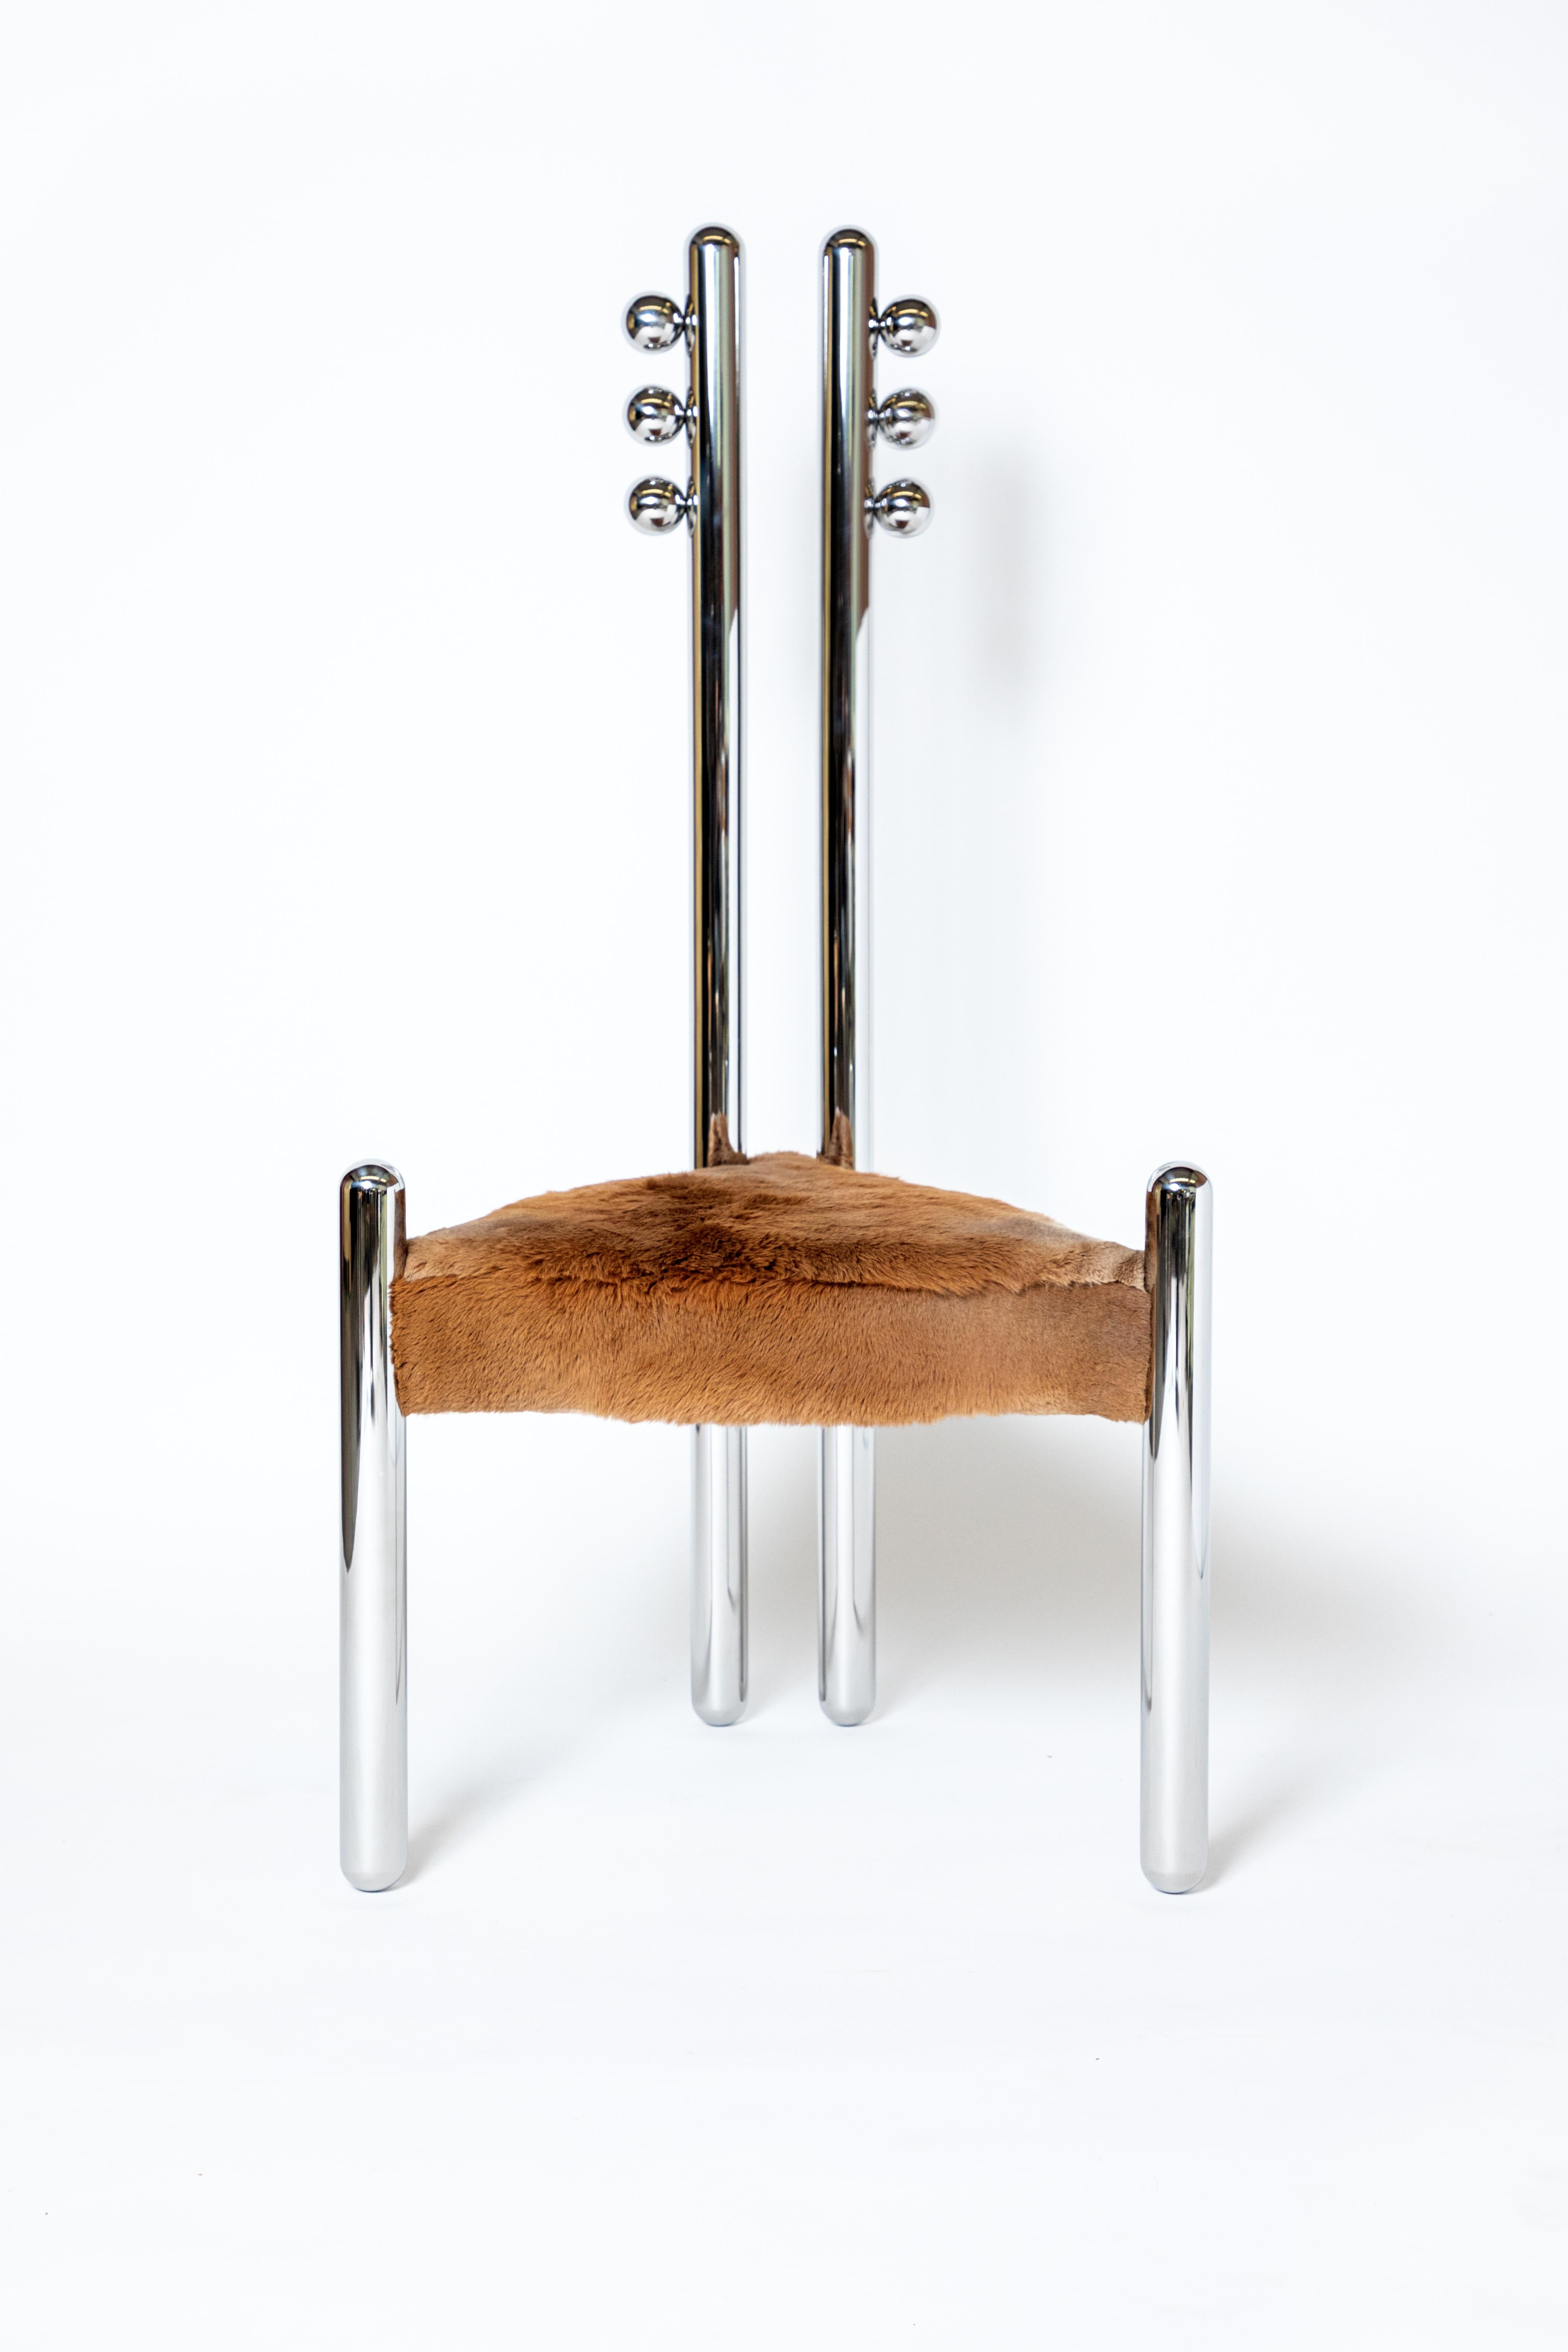 Six variations on stainless steel by Pietro Franceschini
Two pipes back
Dimensions: W 51 x L 61 x H 123 cm 
Materials: Stainless steel mirror-polished, sheepskin

Series of six chairs in stainless steel and fur designed by Pietro Franceschini.